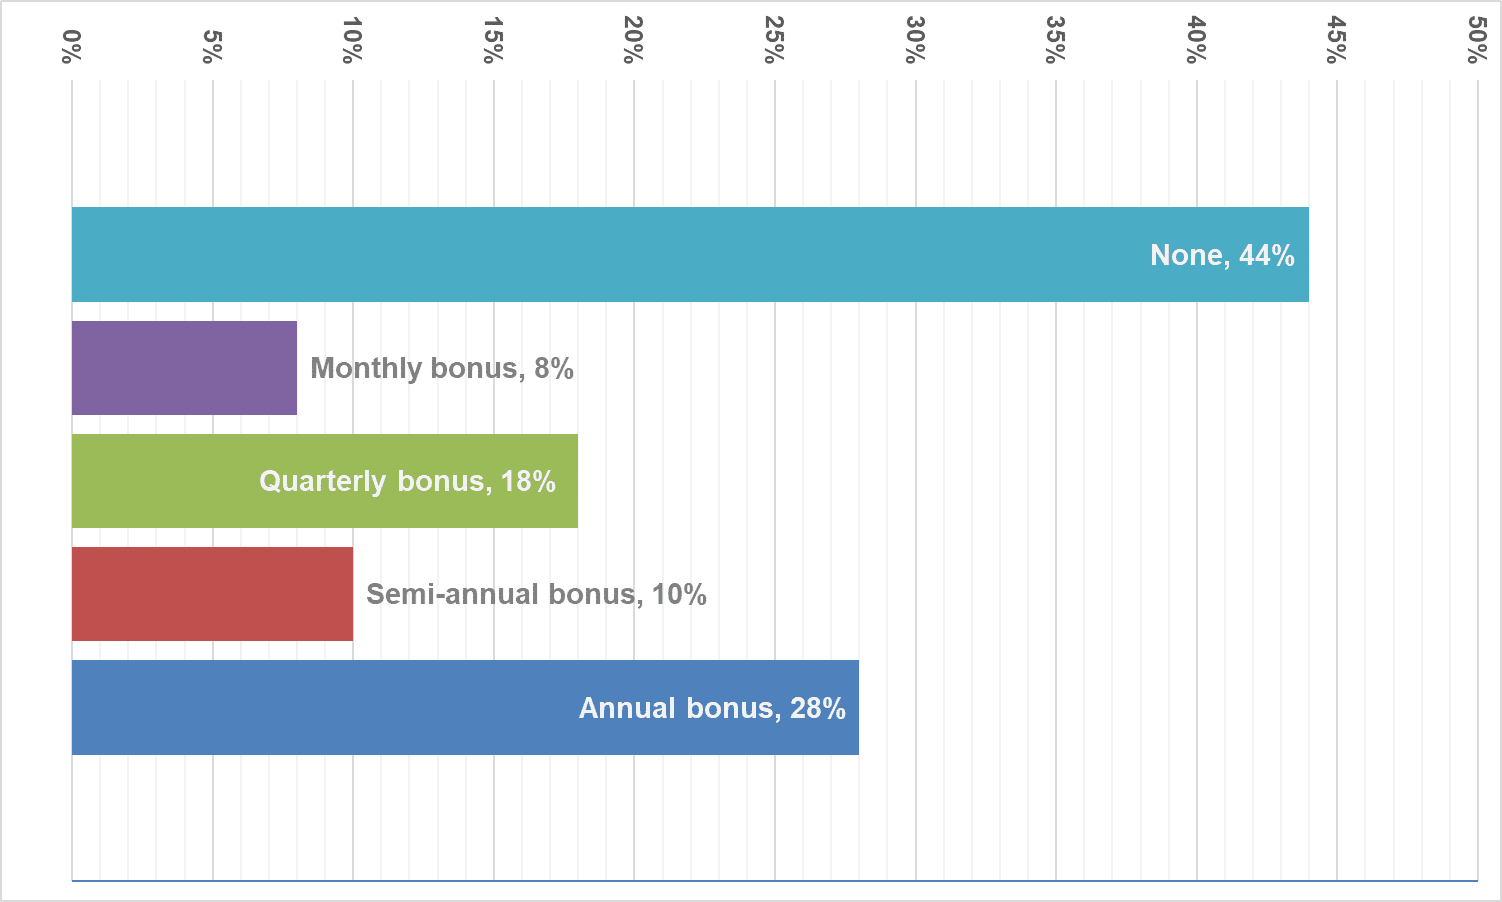 Fig. 19. Frequency of bonus payouts